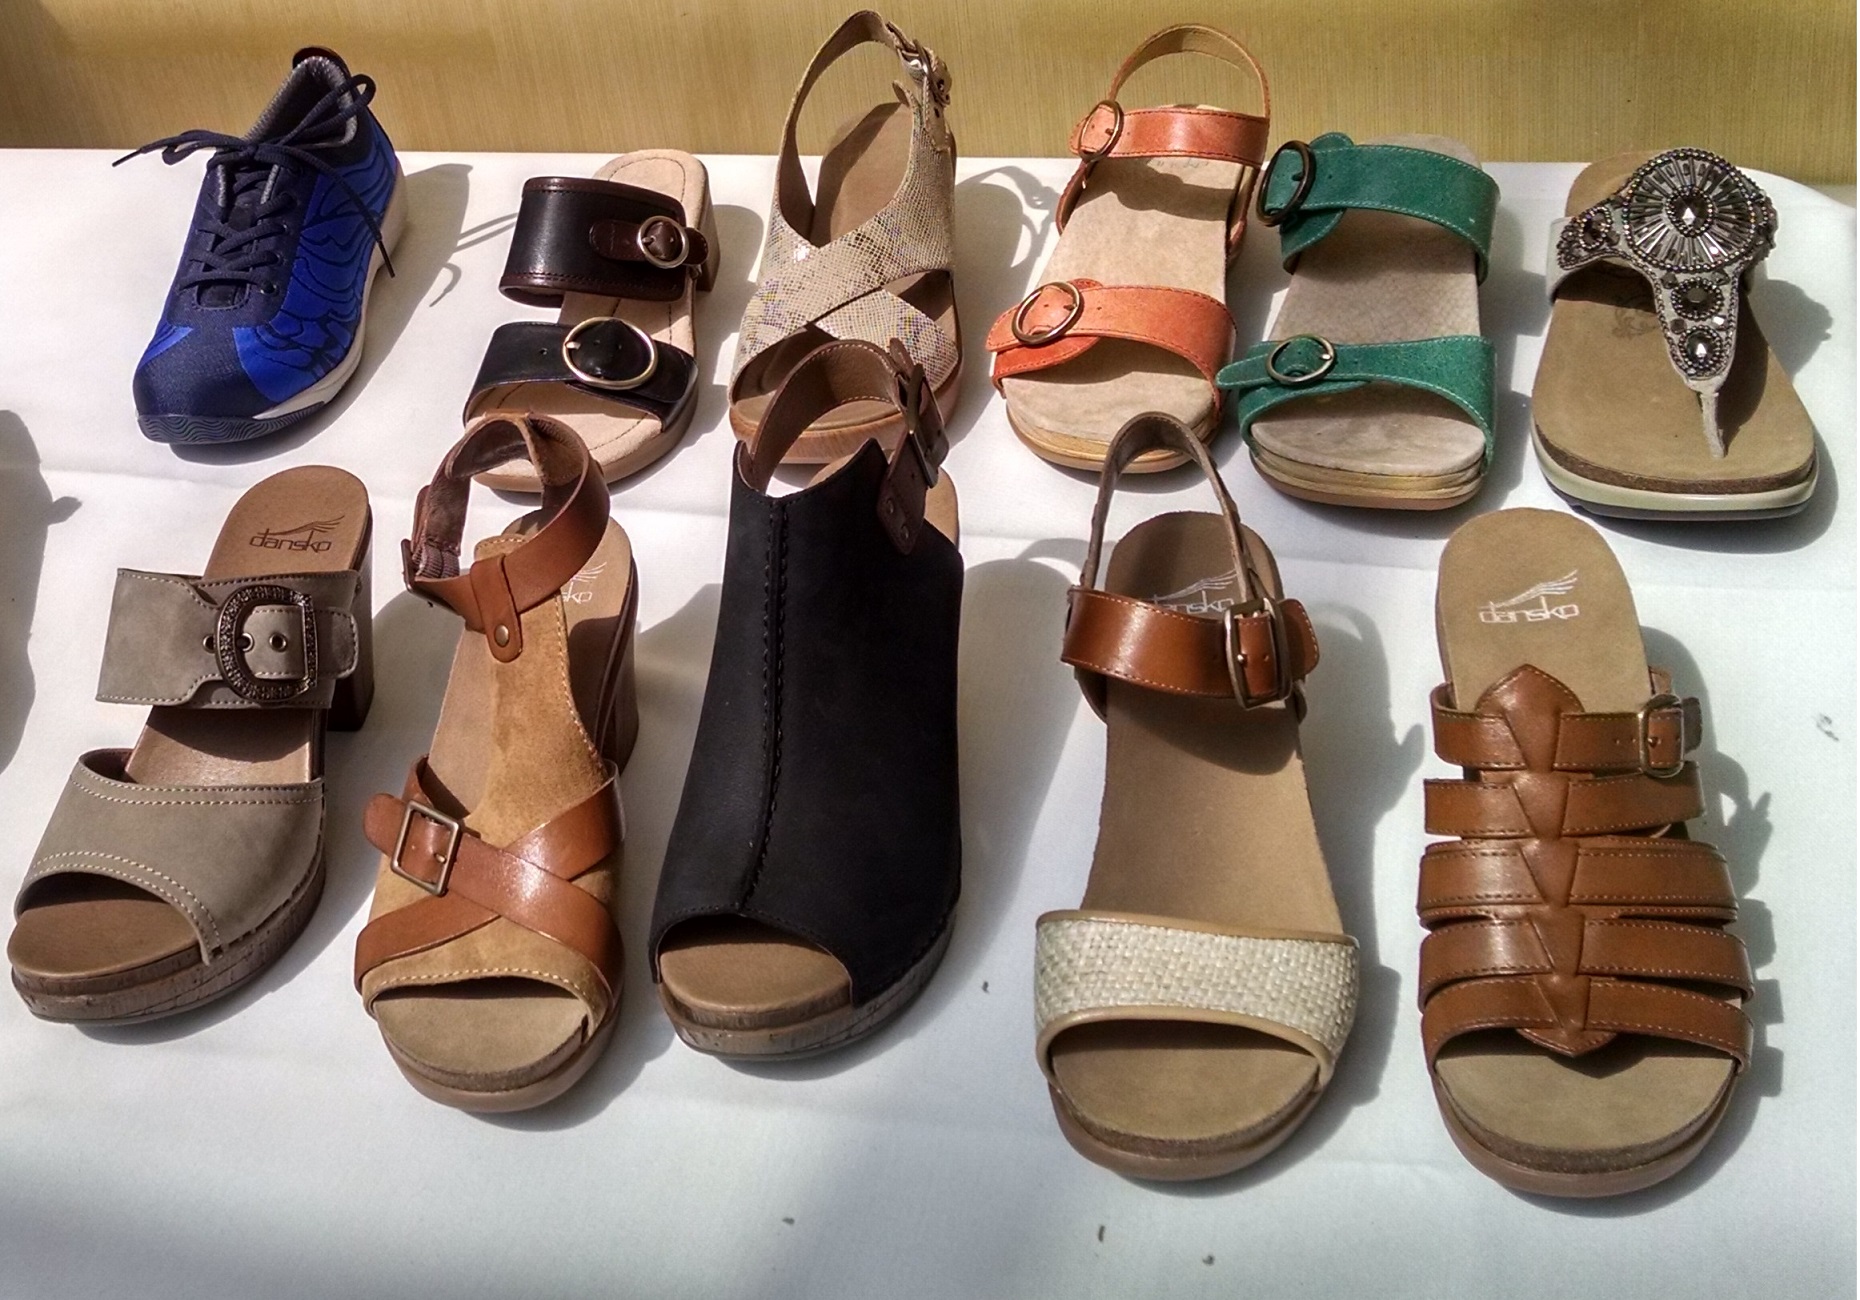 Pamper summer feet with sandals and shoes that offer all day comfort and support